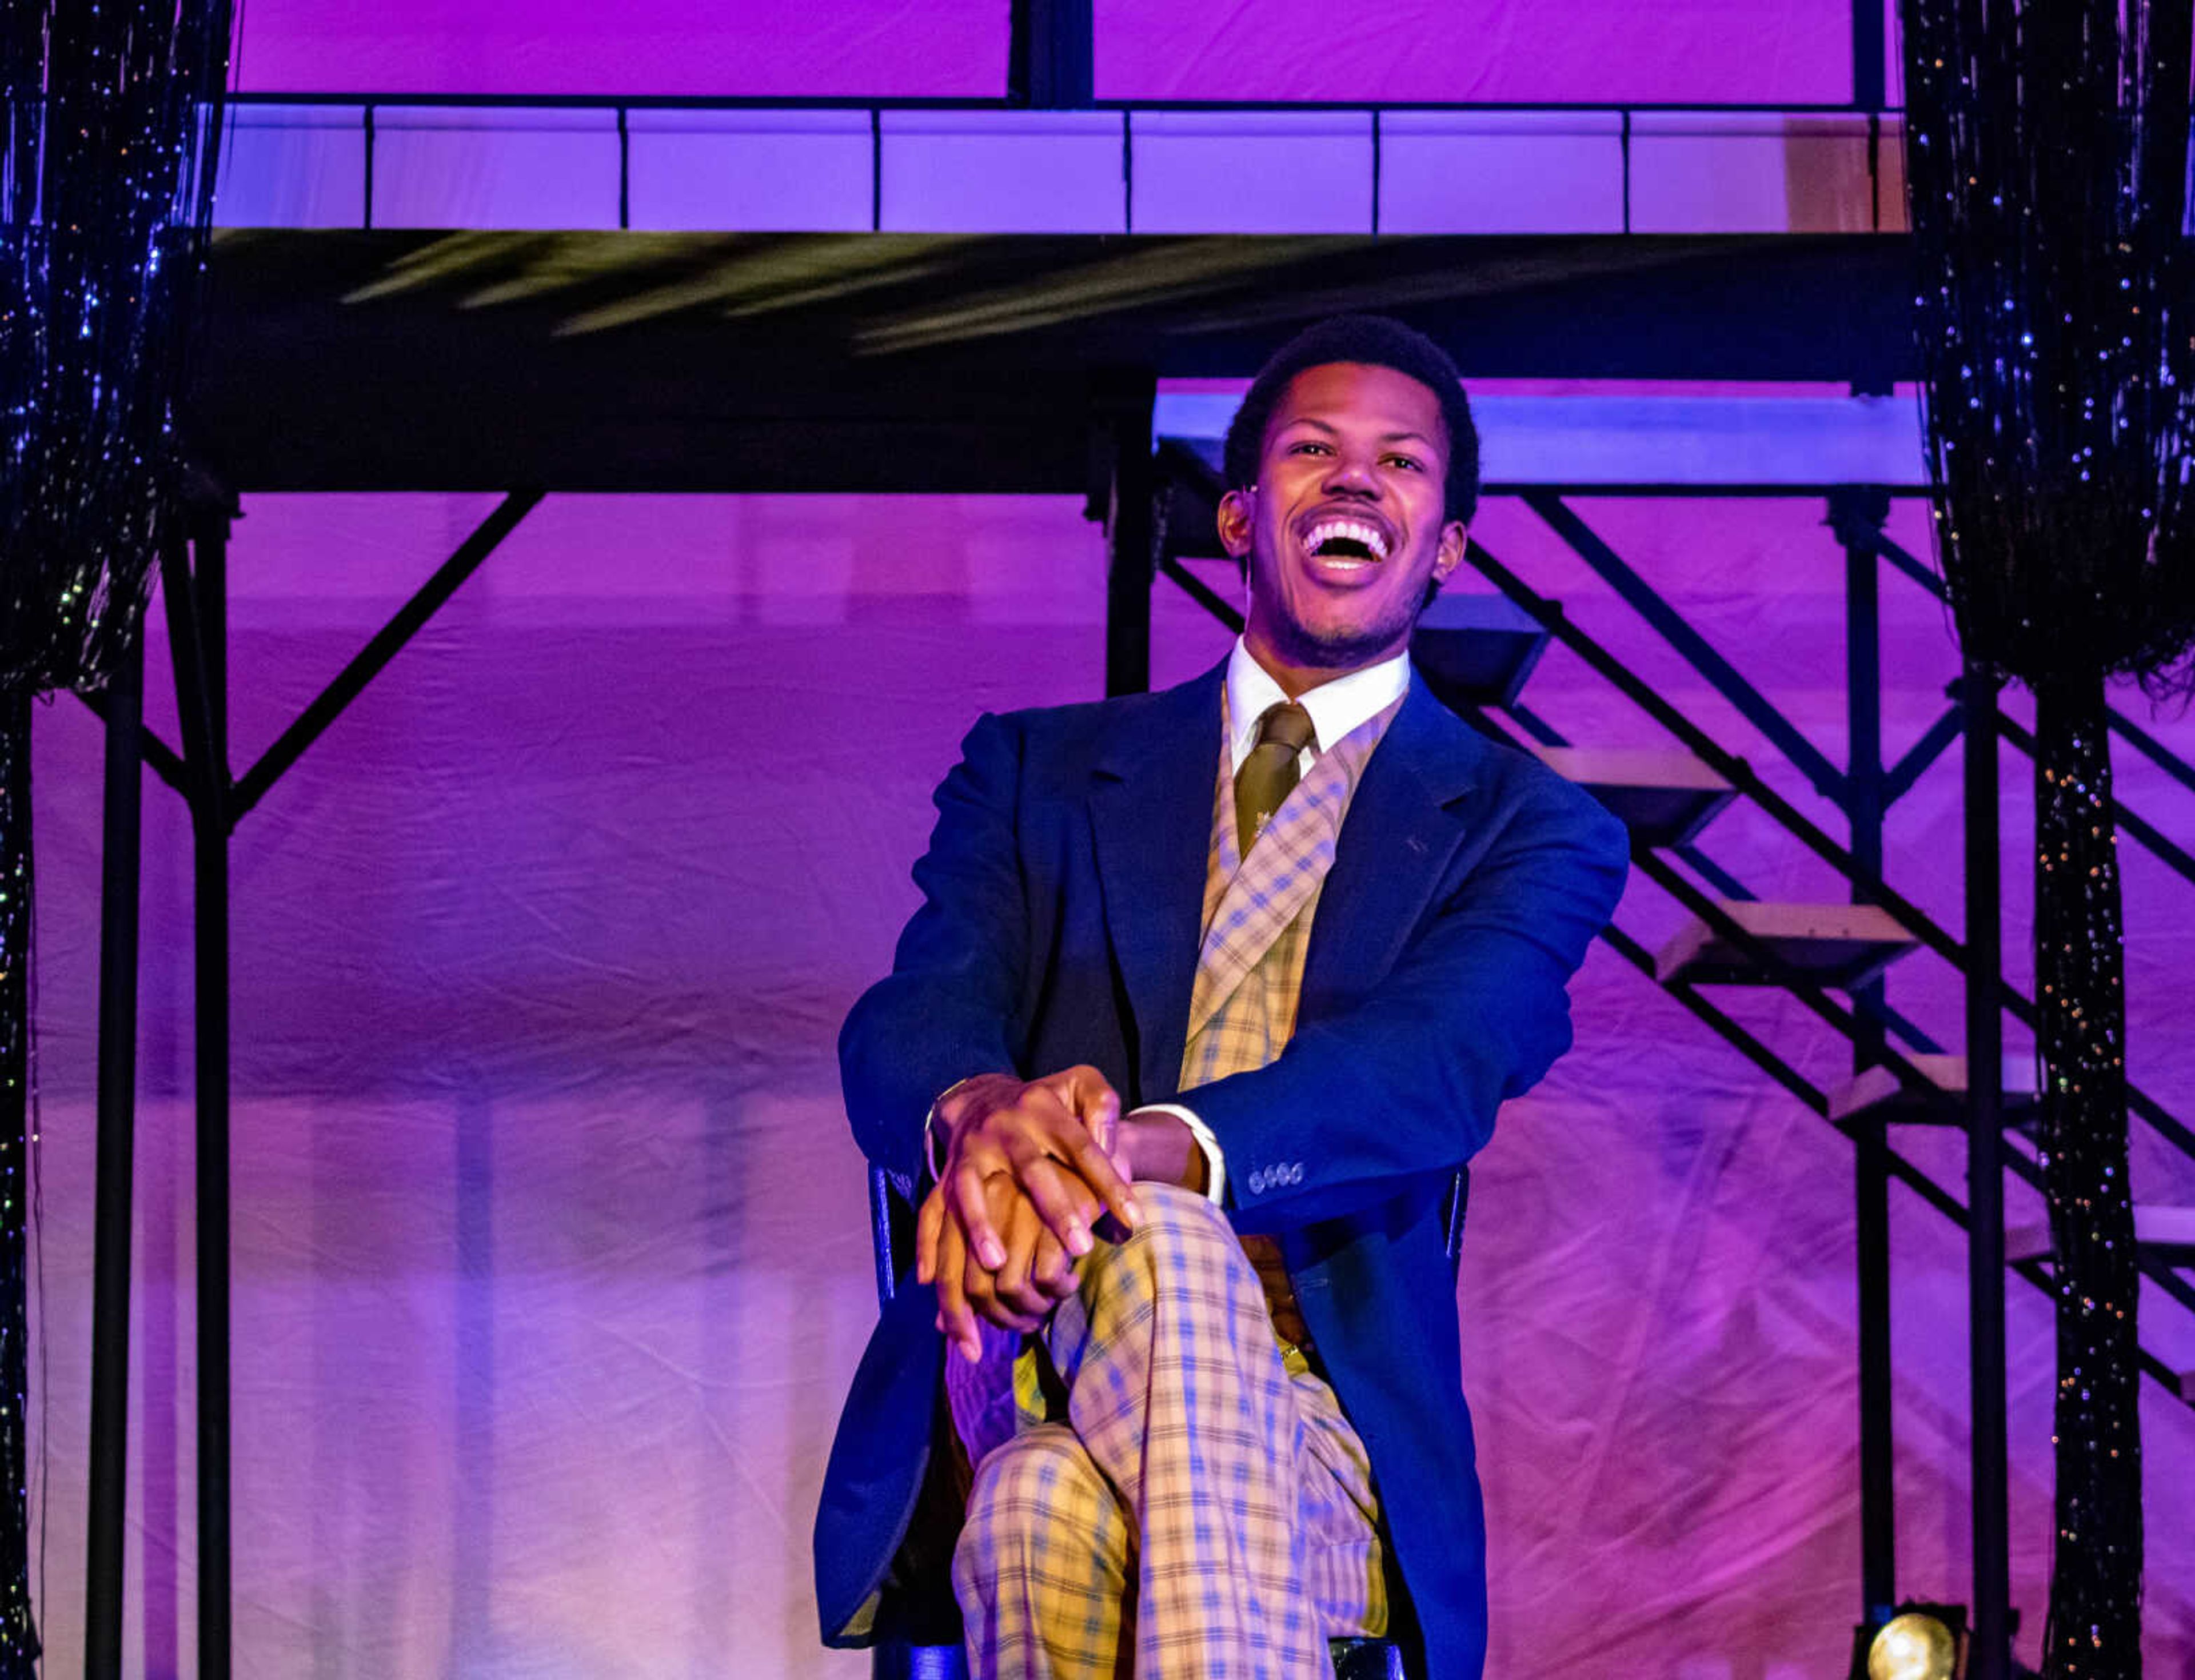 Anthony Shepard shows charm and wit during his solo in Ain't Misbehavin' on Tuesday, Oct. 8 in Rust Flexible Theatre in Cape Girardeau, Missouri.